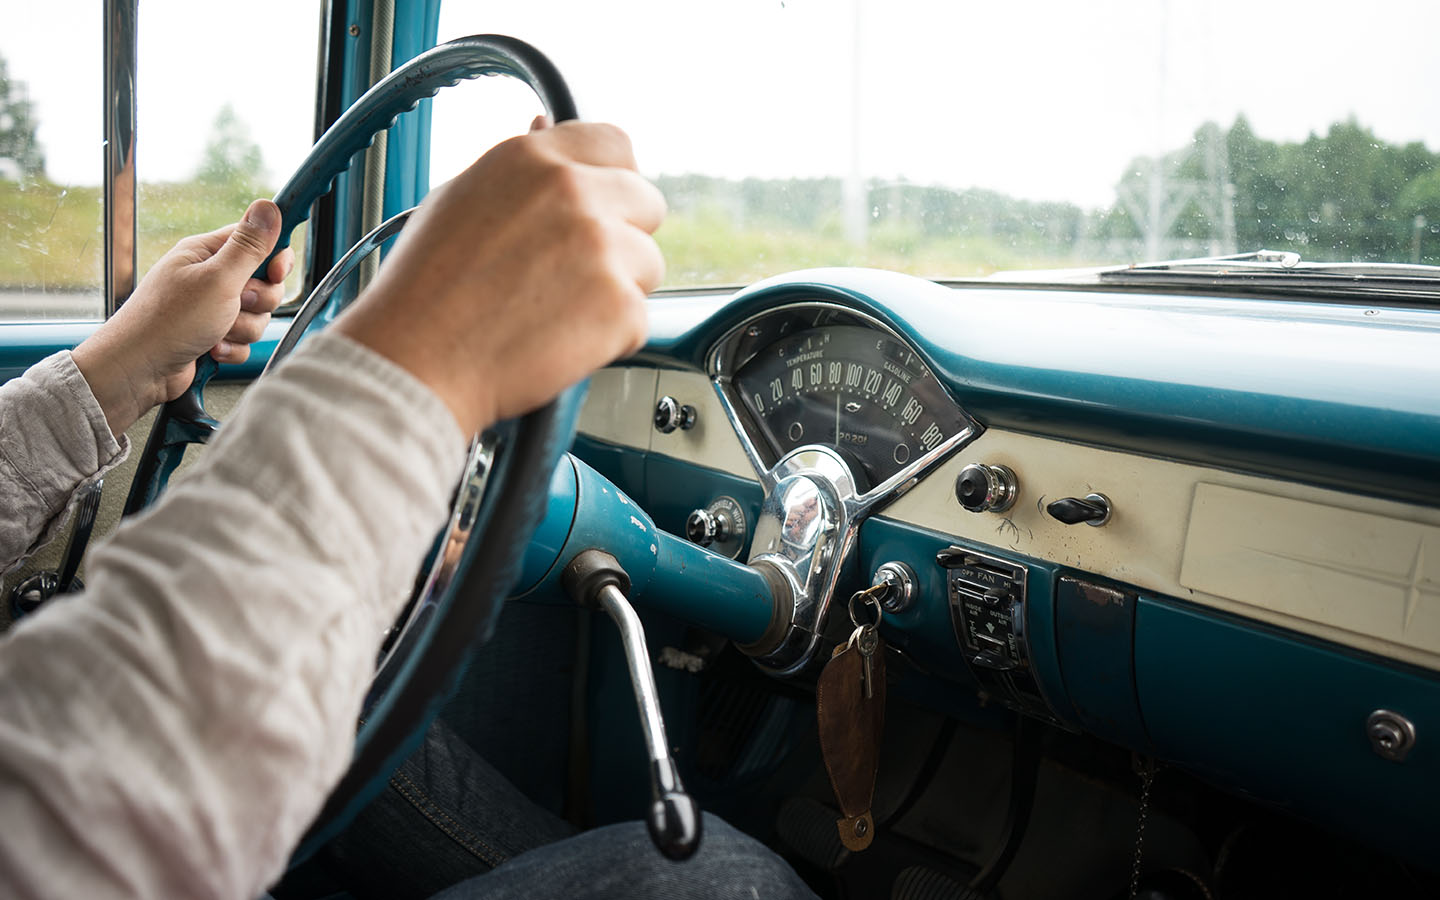 old or damaged steering wheels lead to issues like lack of handling and stability